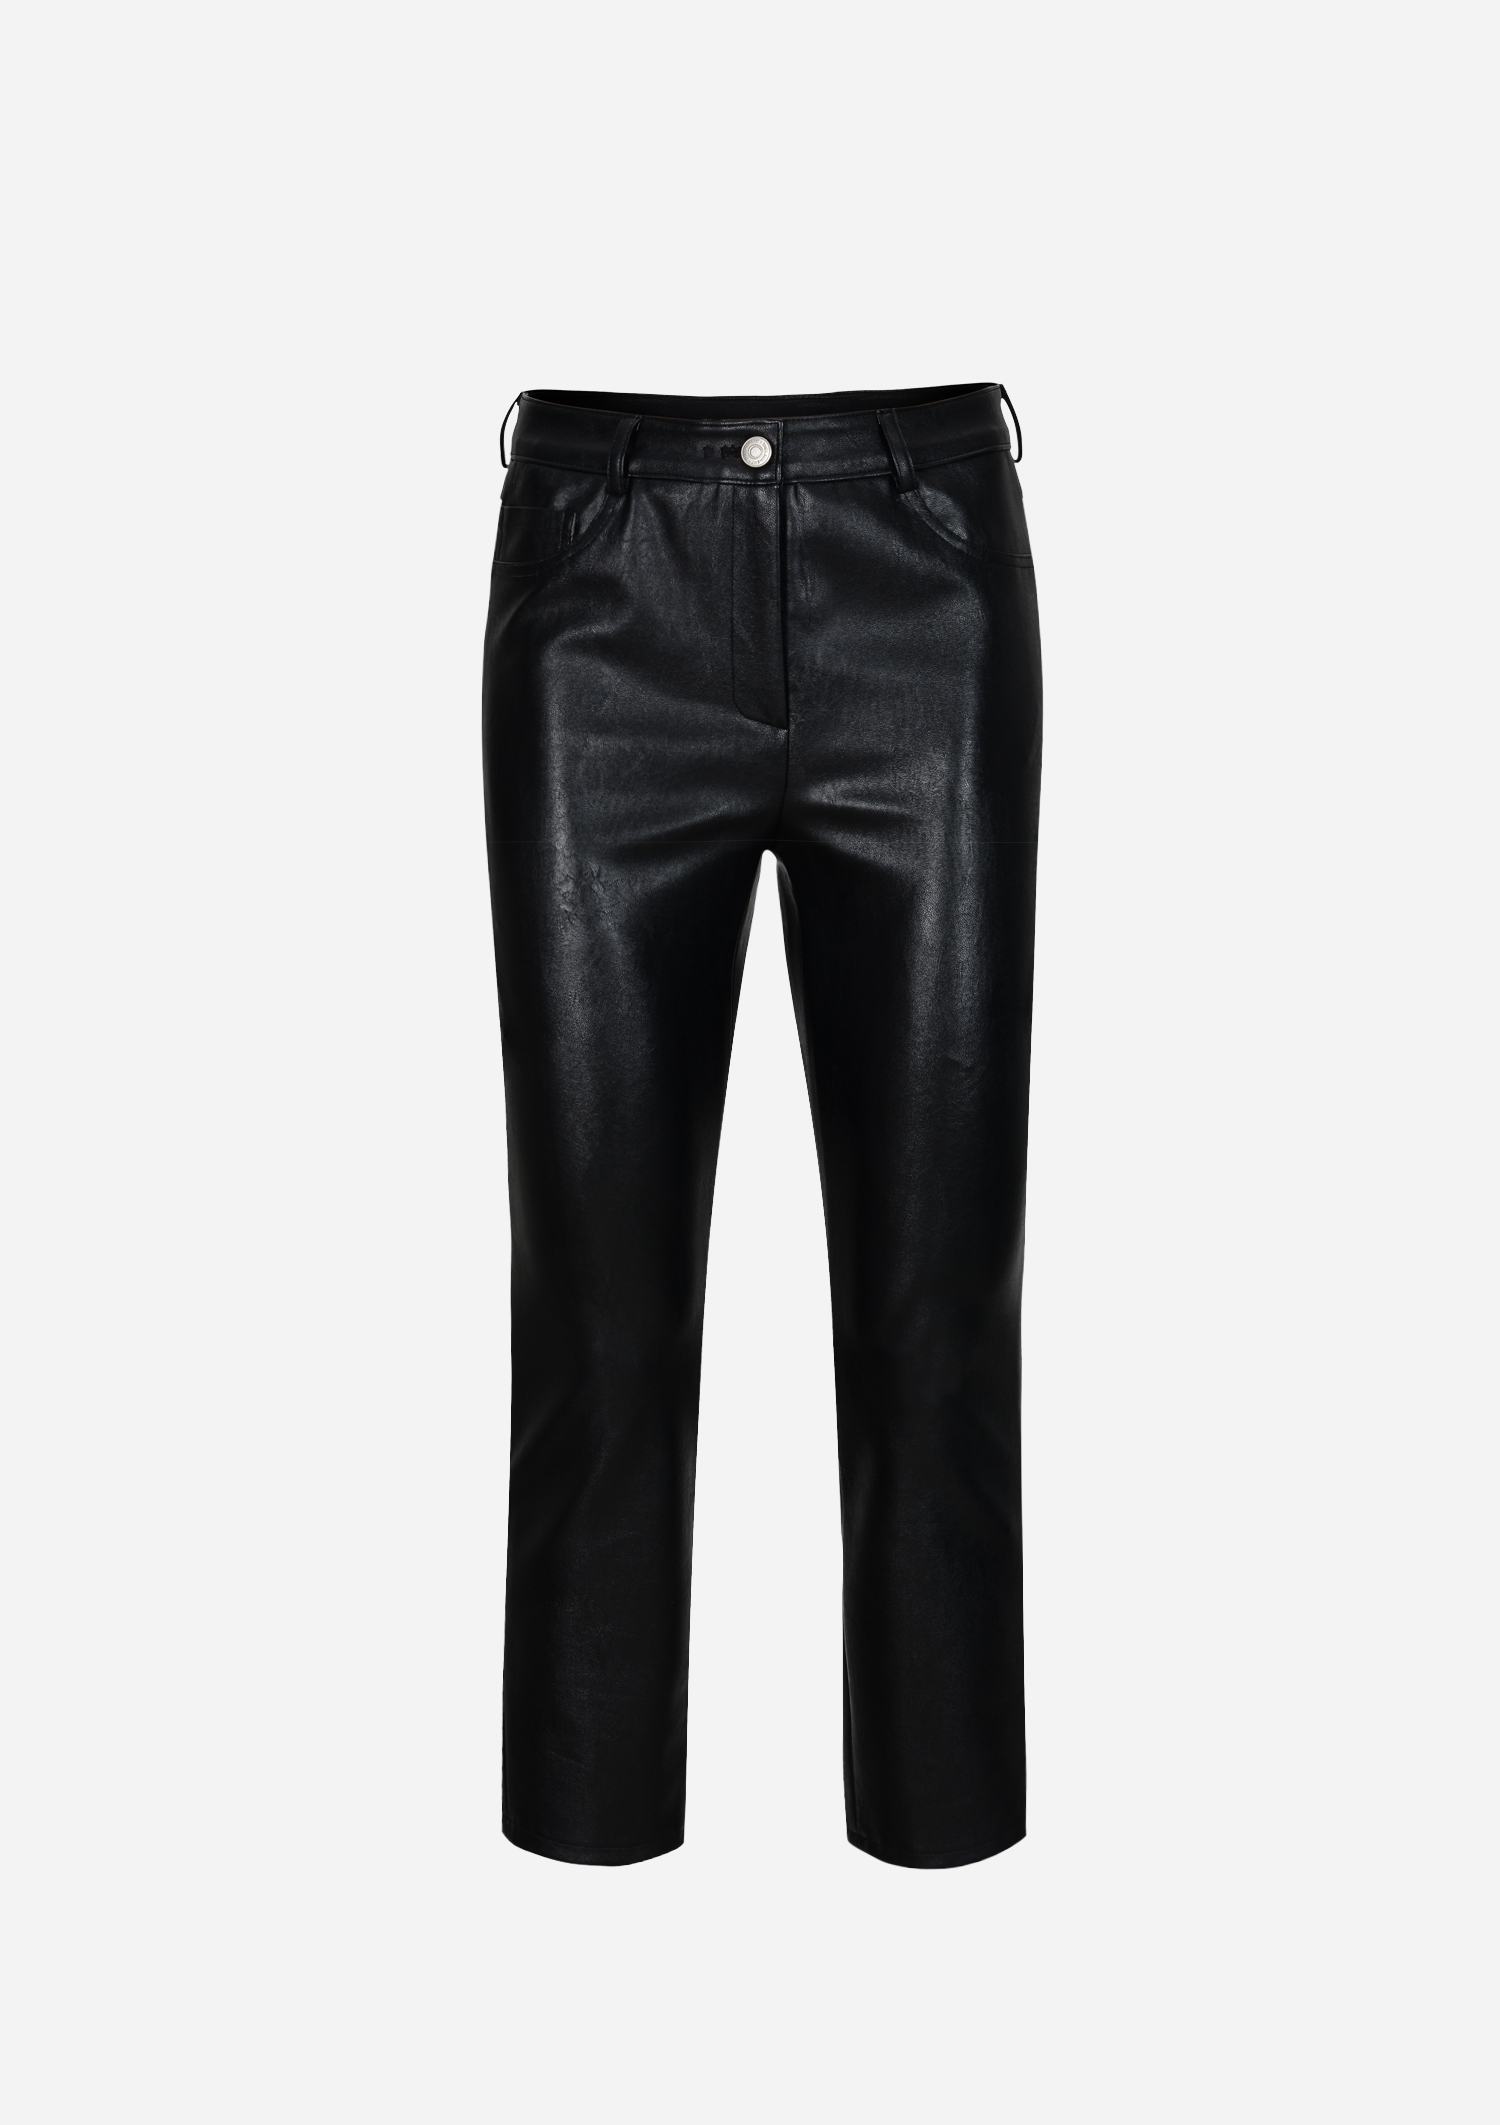 LA straight cropped leather pants